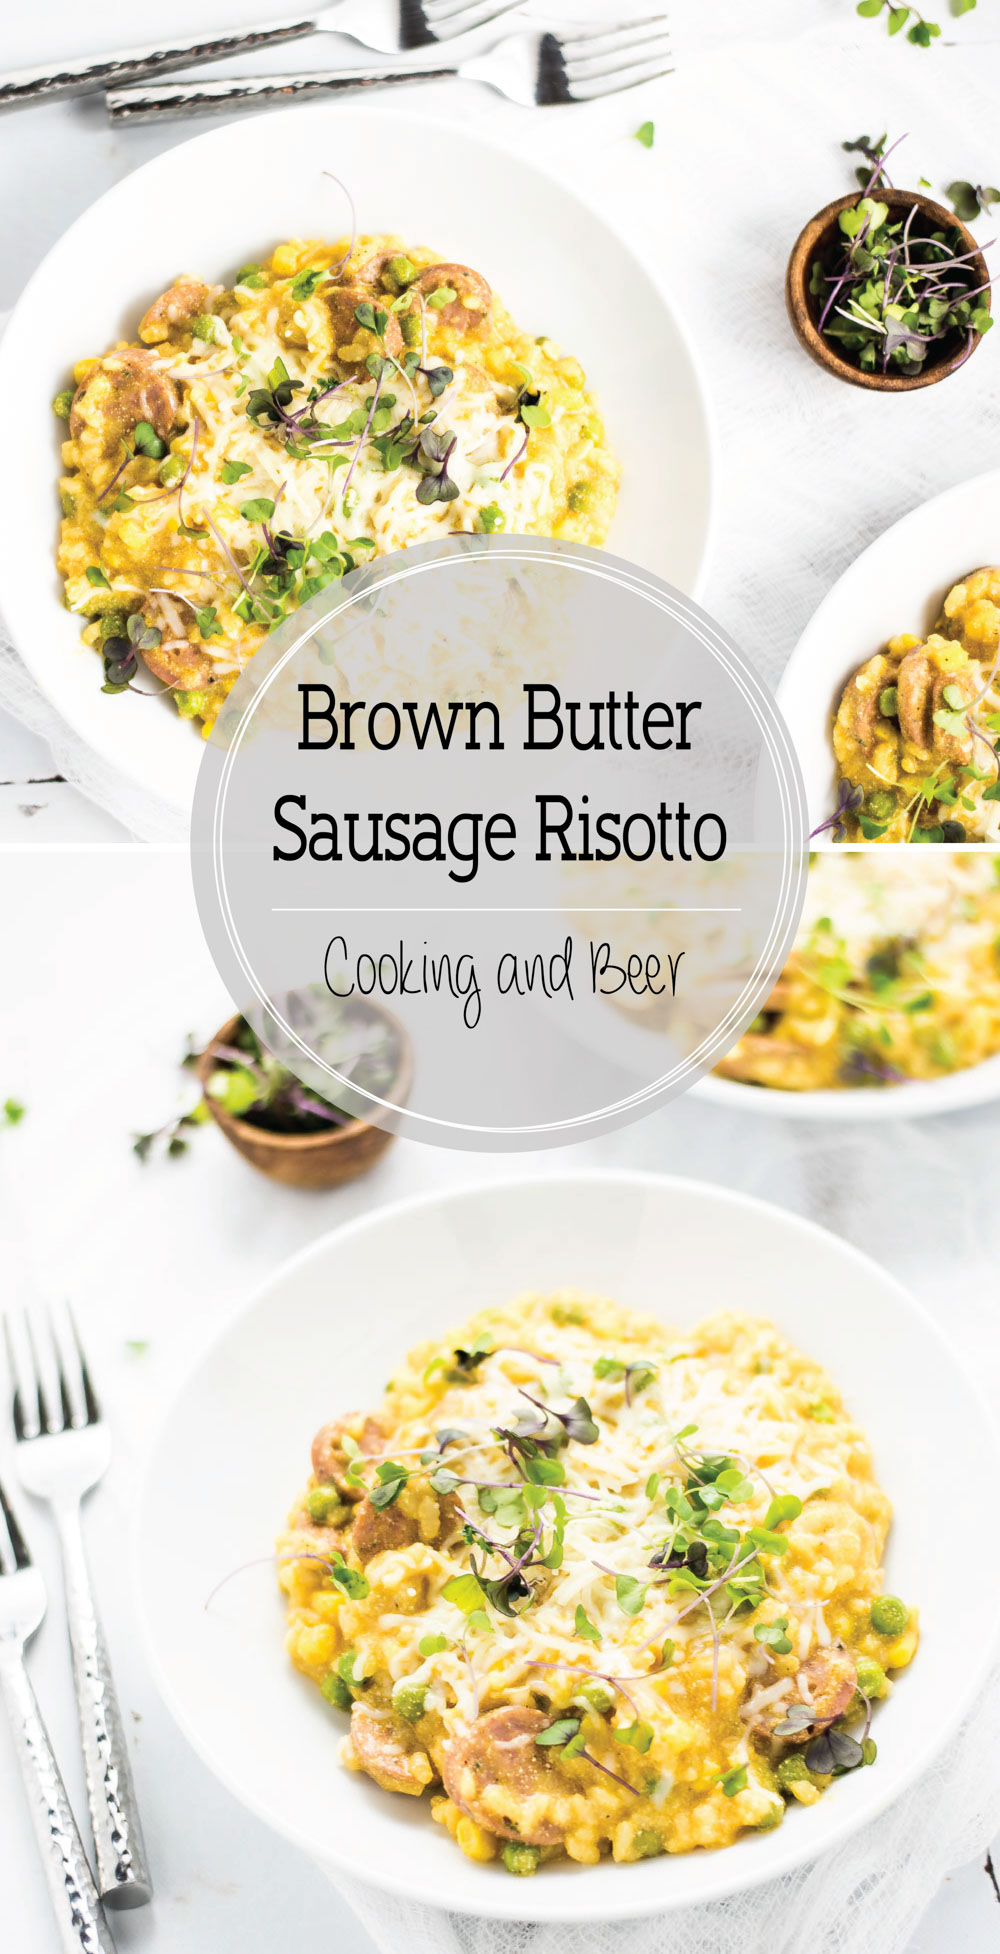 Brown Butter Sausage Risotto with Summer Vegetables is an elegant, yet simple dinner recipe full of comforting flavors!